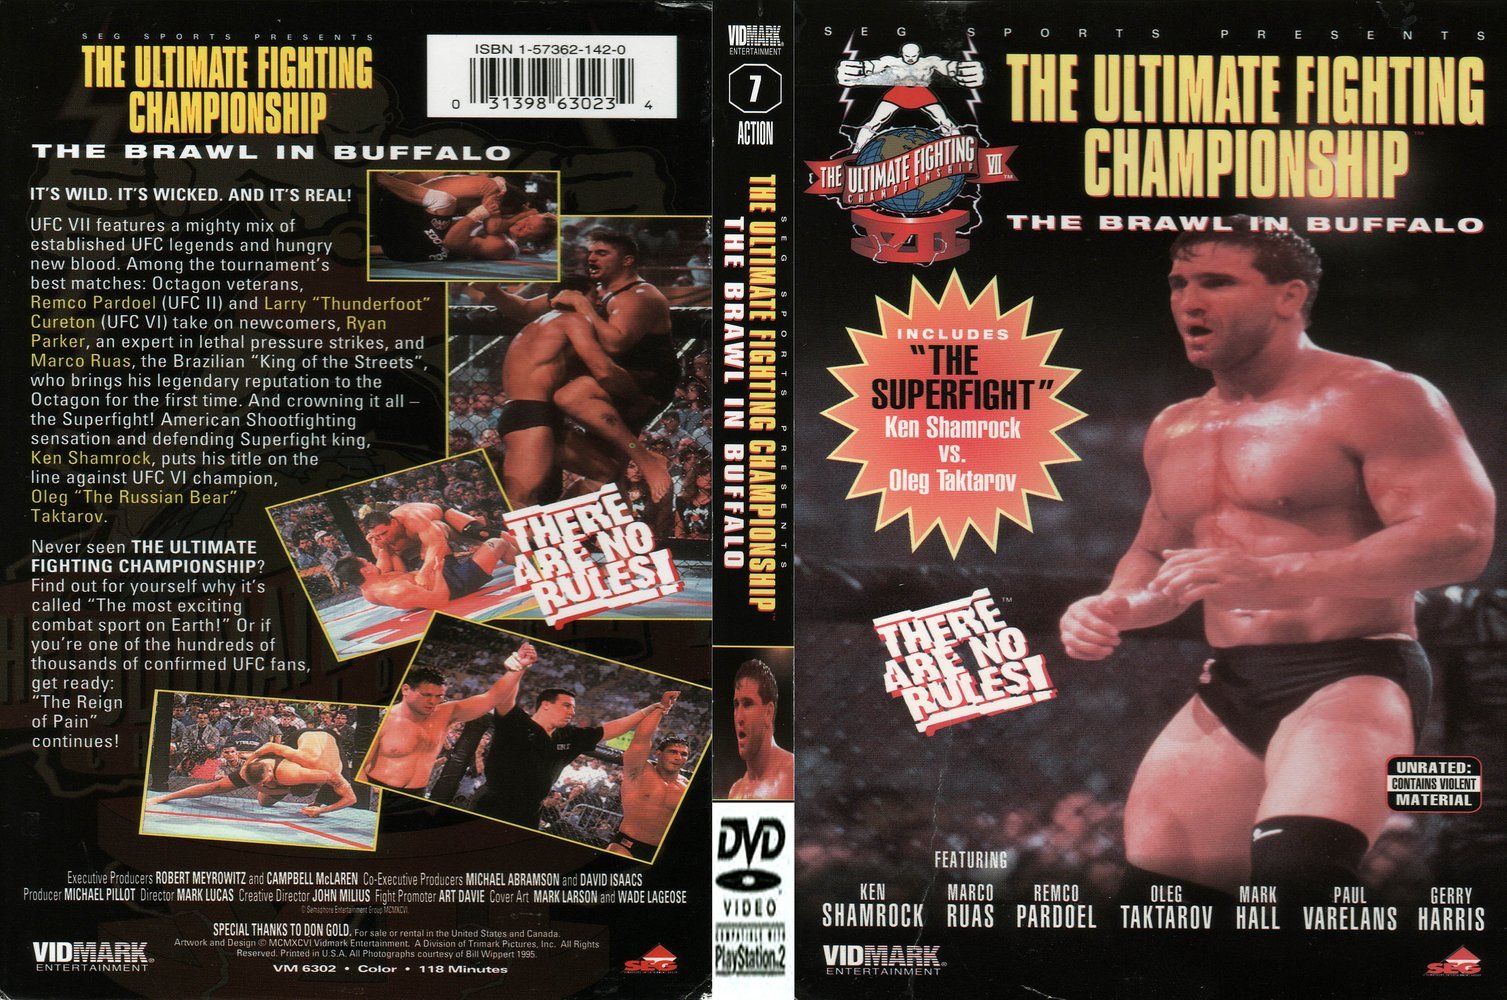 Jaquette DVD Ufc 7 The brawl in Buffalo